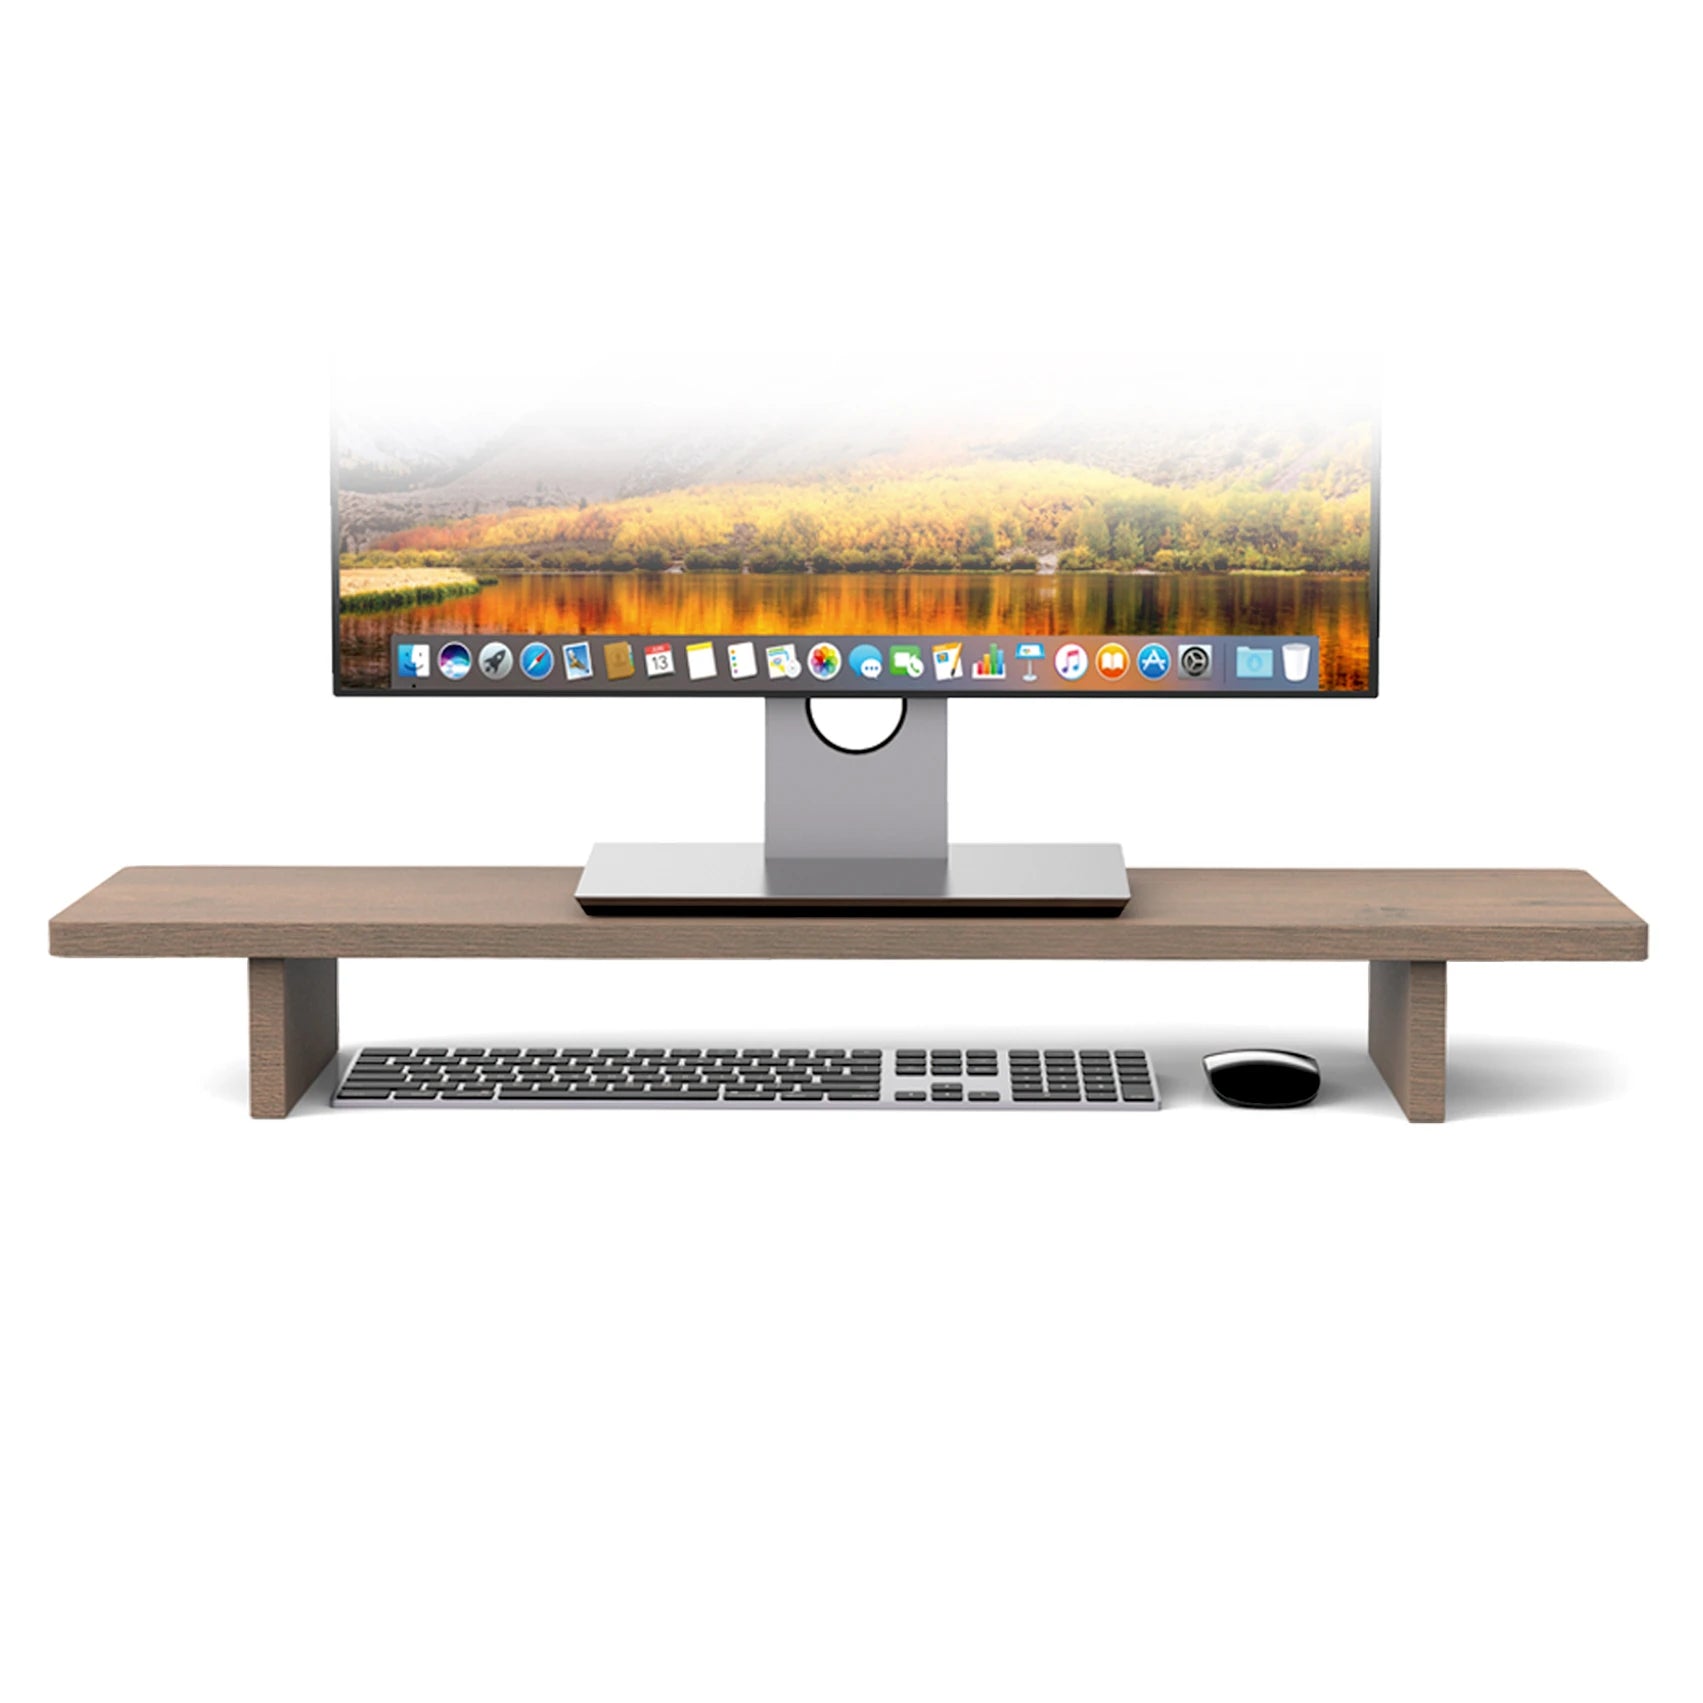 Minimalist élever Ergonomic Monitor Riser in a natural wood finish, offering a sleek stand to enhance screen viewing comfort and desk organization